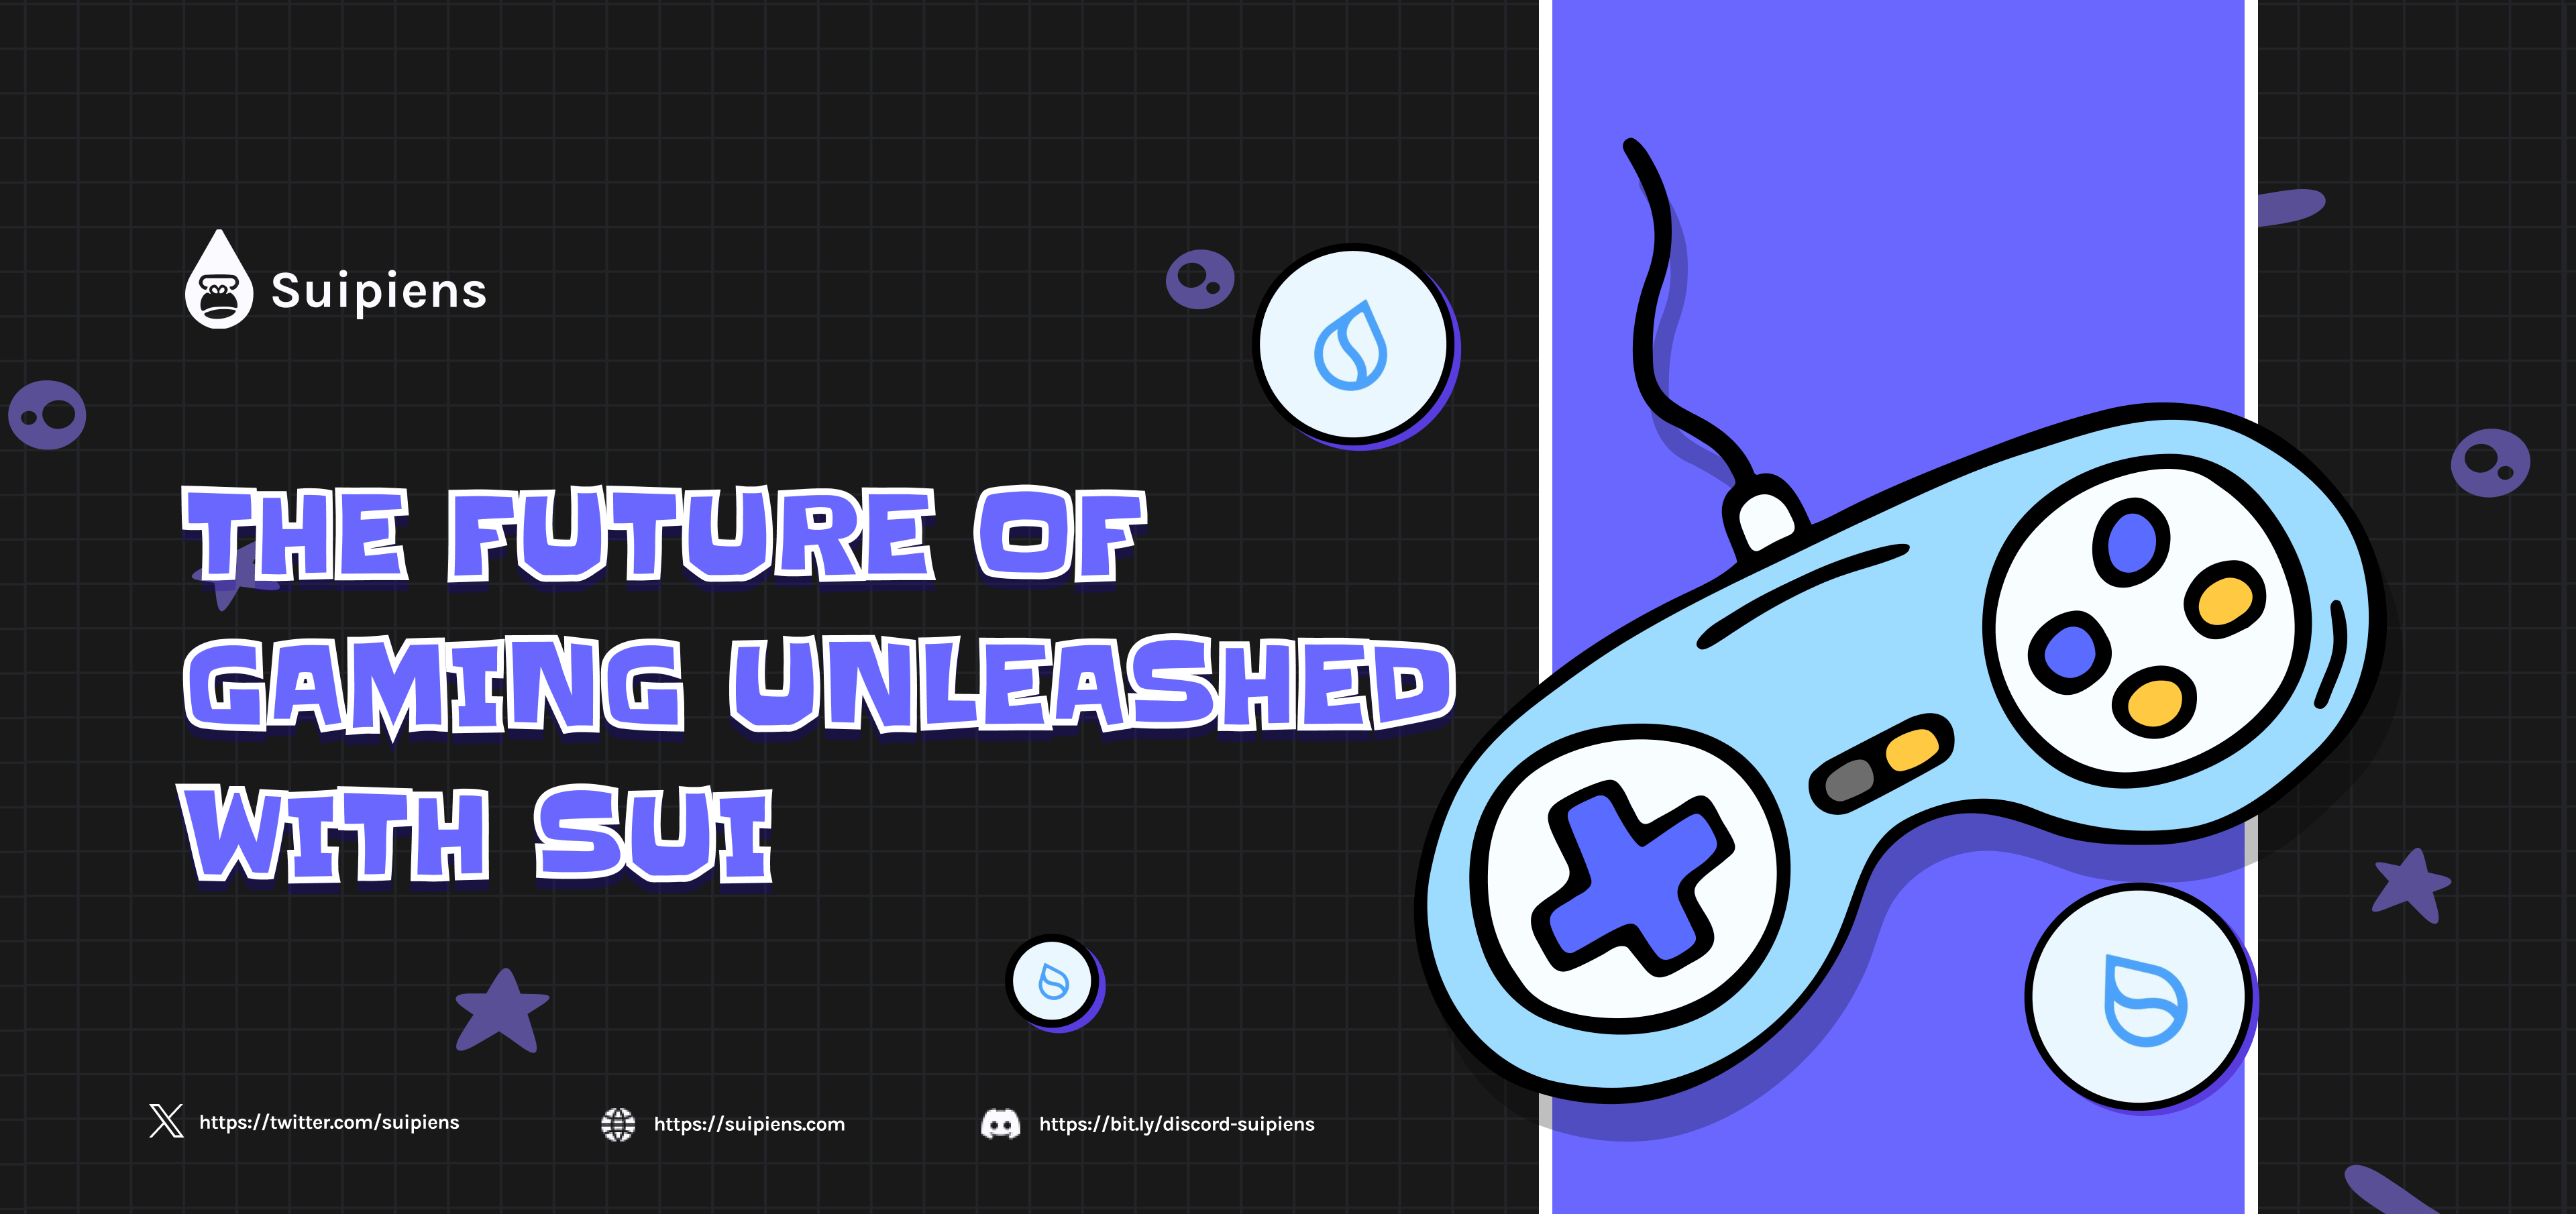 The Future of Gaming Unleashed With Sui